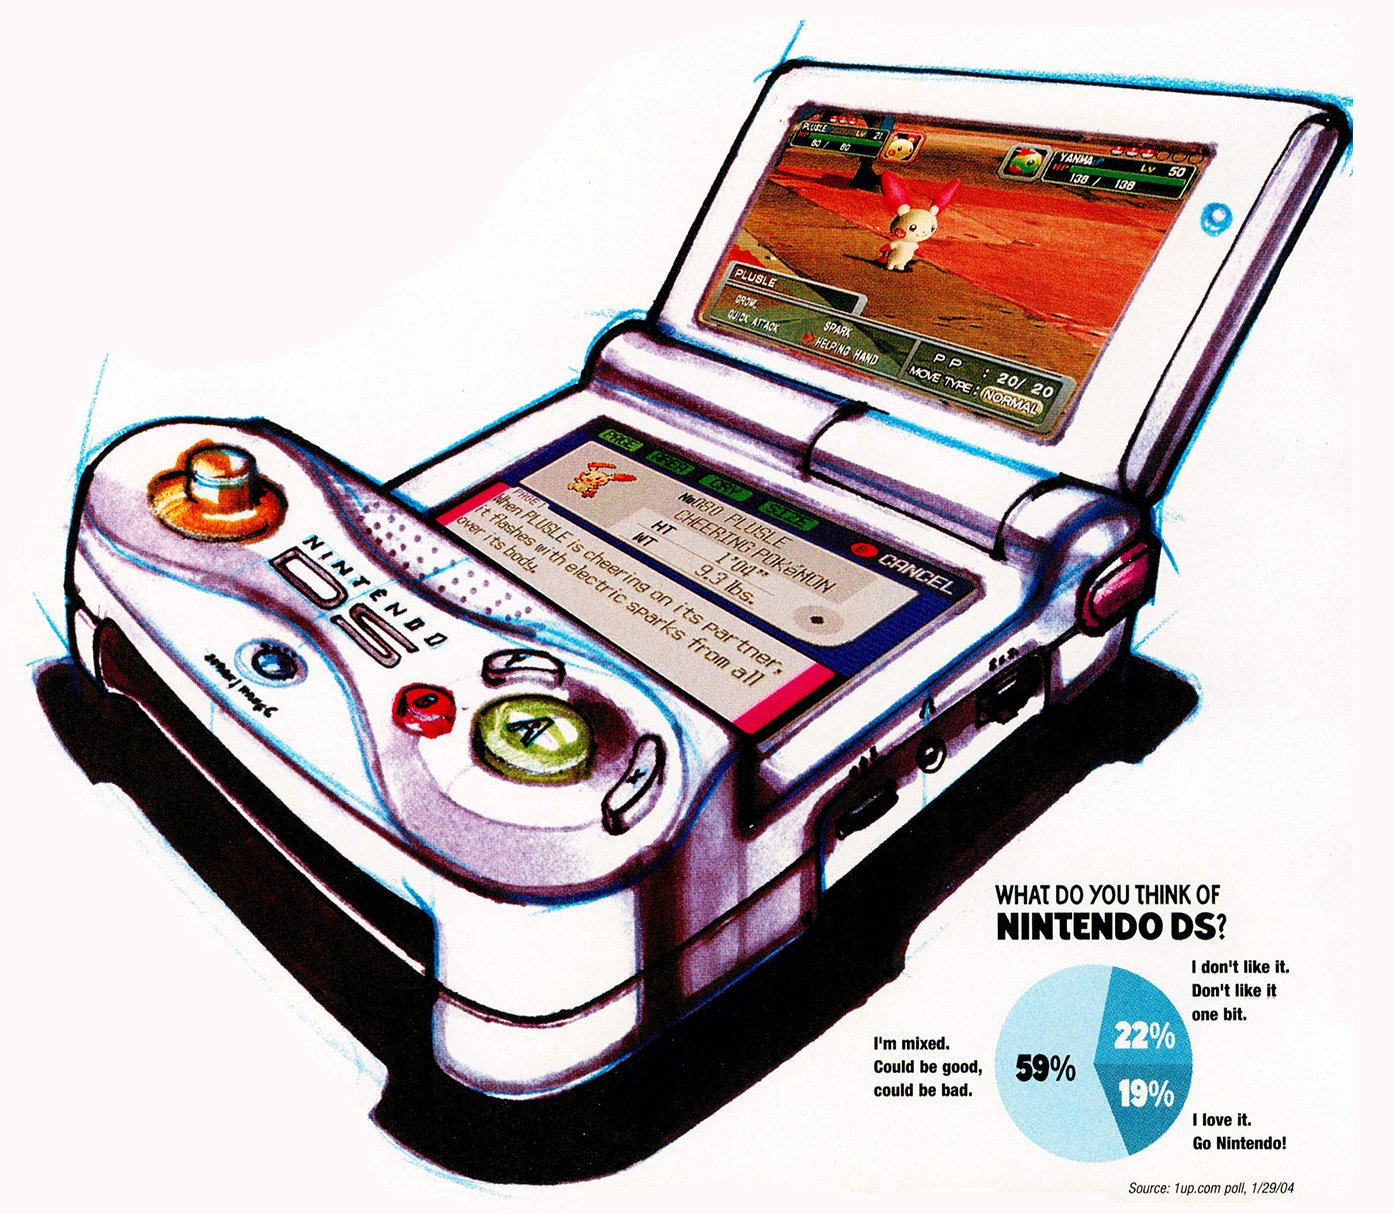 DidYouKnowGaming on Twitter: "In early 2004, the only info available for  the upcoming Nintendo DS was its name and the fact it would have two  screen. EGM published this artwork, thinking it